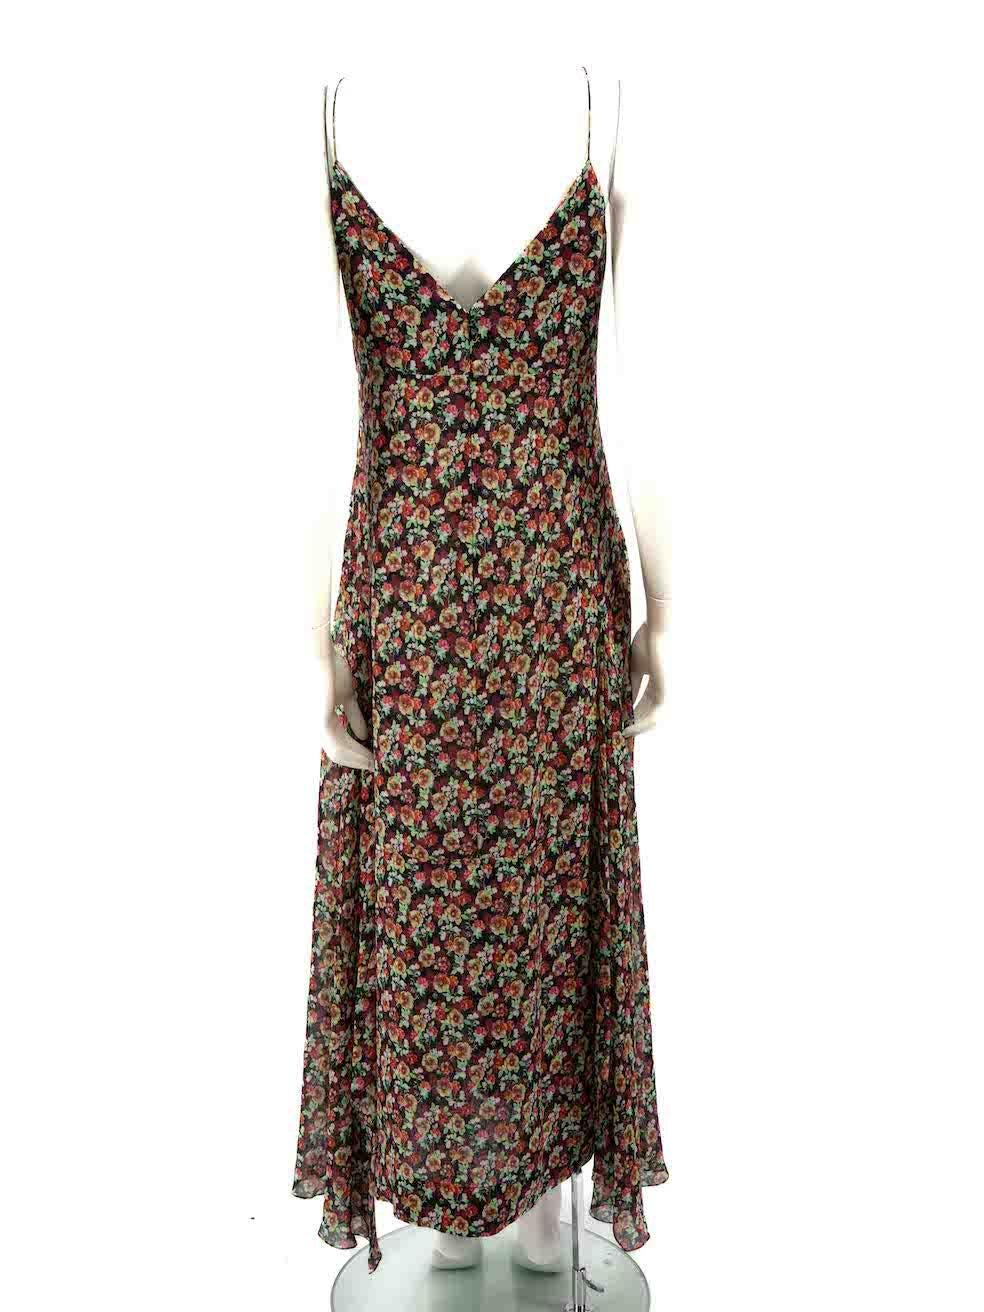 Victoria Beckham Floral Print Silk Cami Dress Size M In Good Condition For Sale In London, GB